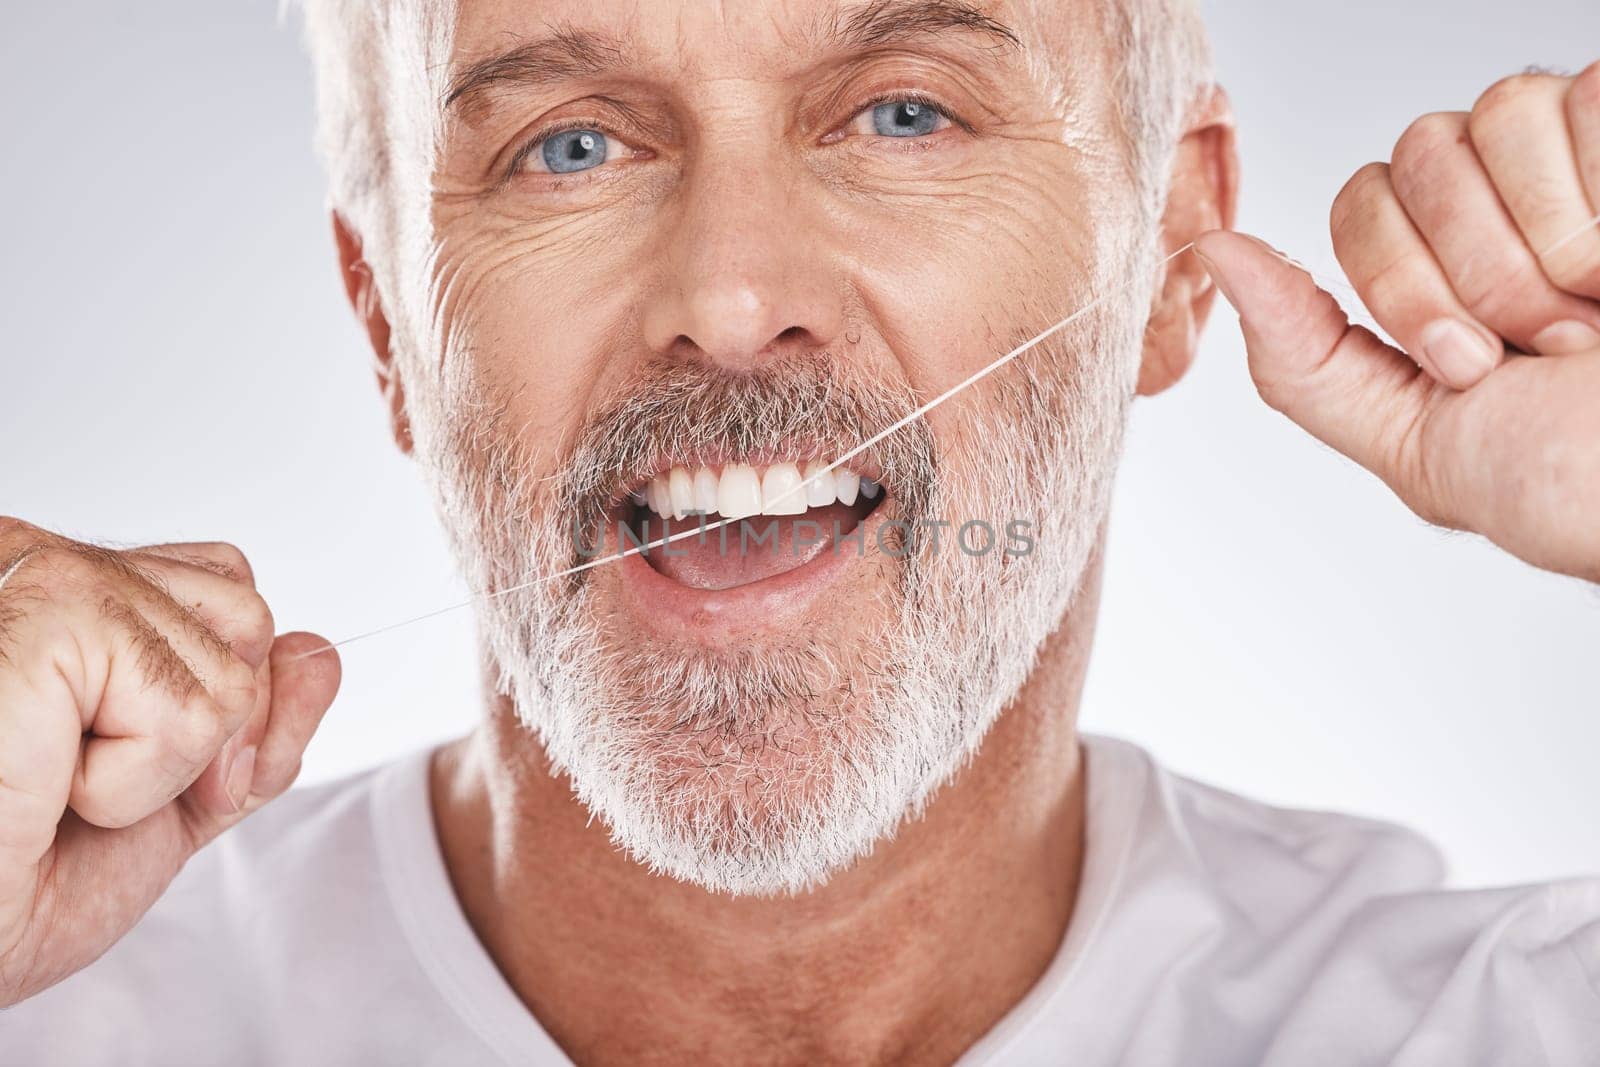 Dental, floss and face of senior man in studio isolated on a gray background. Portrait, cleaning or elderly male model with product flossing teeth for oral wellness, healthy gum hygiene or tooth care by YuriArcurs